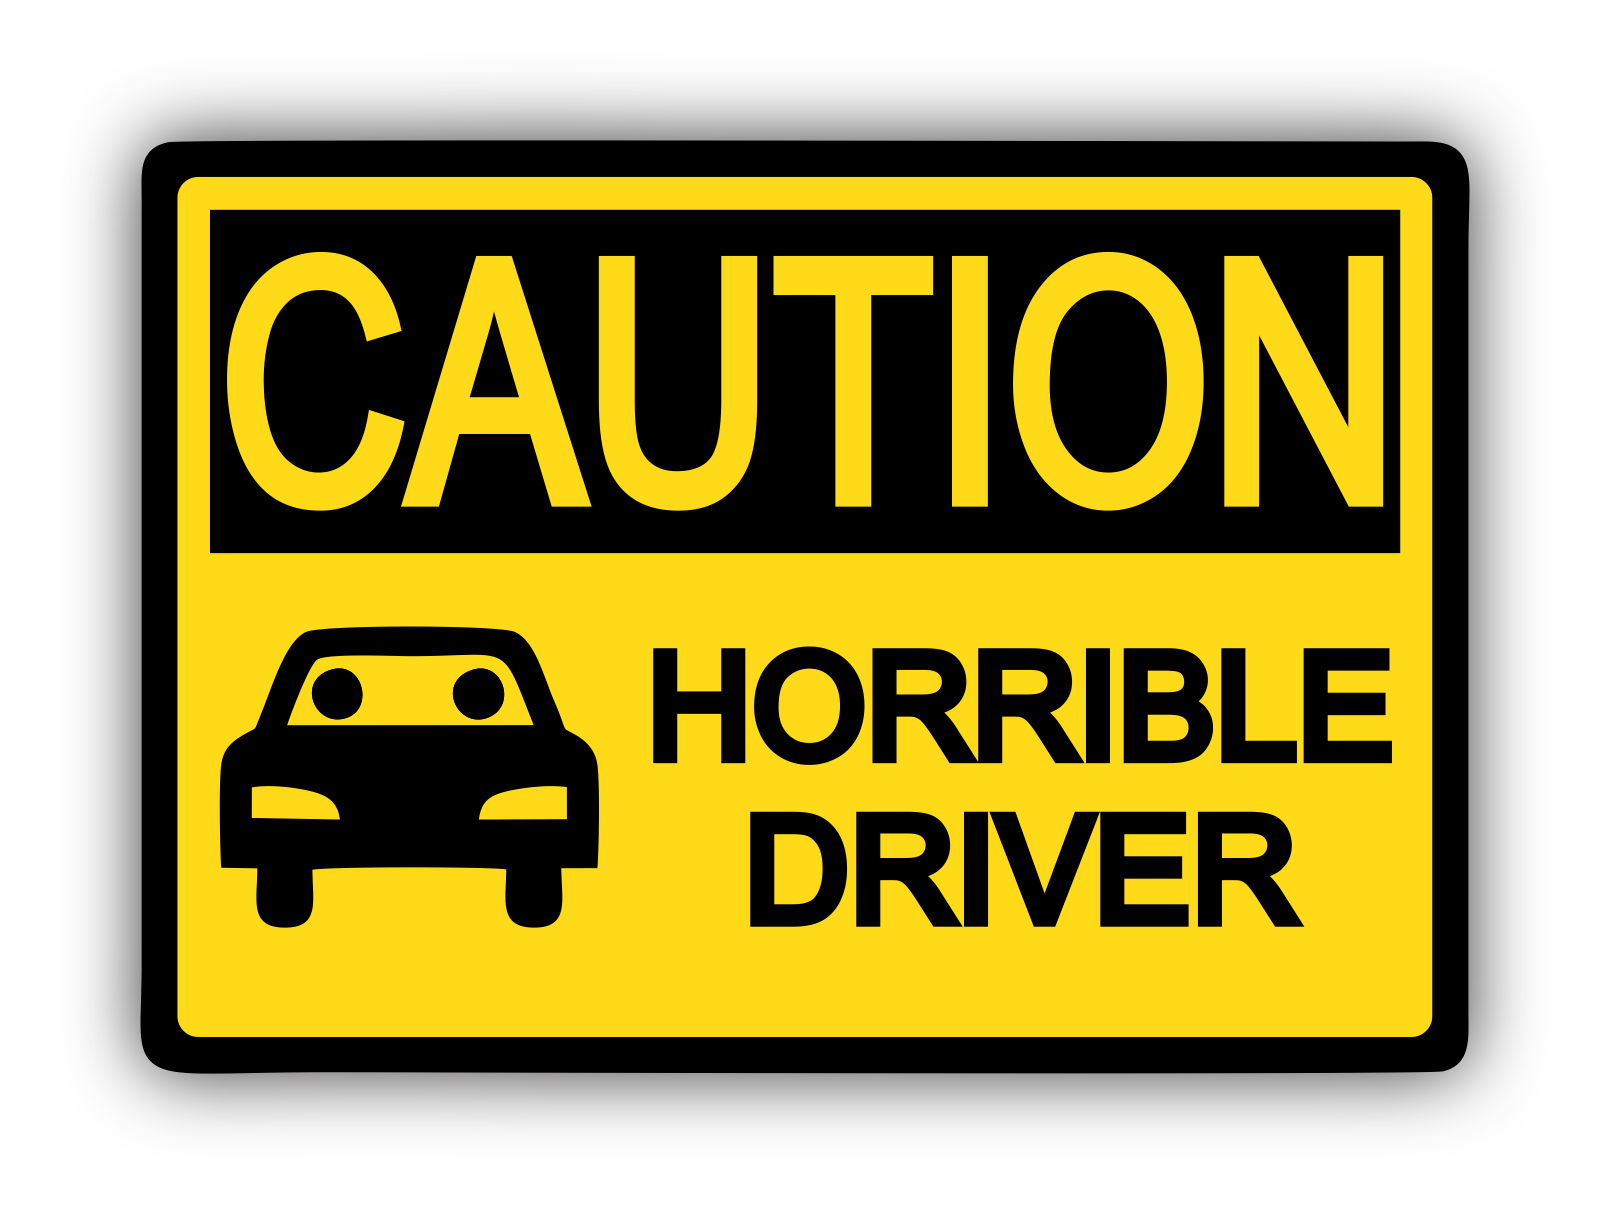 A pass on sticker showing a car with a bad driver on it